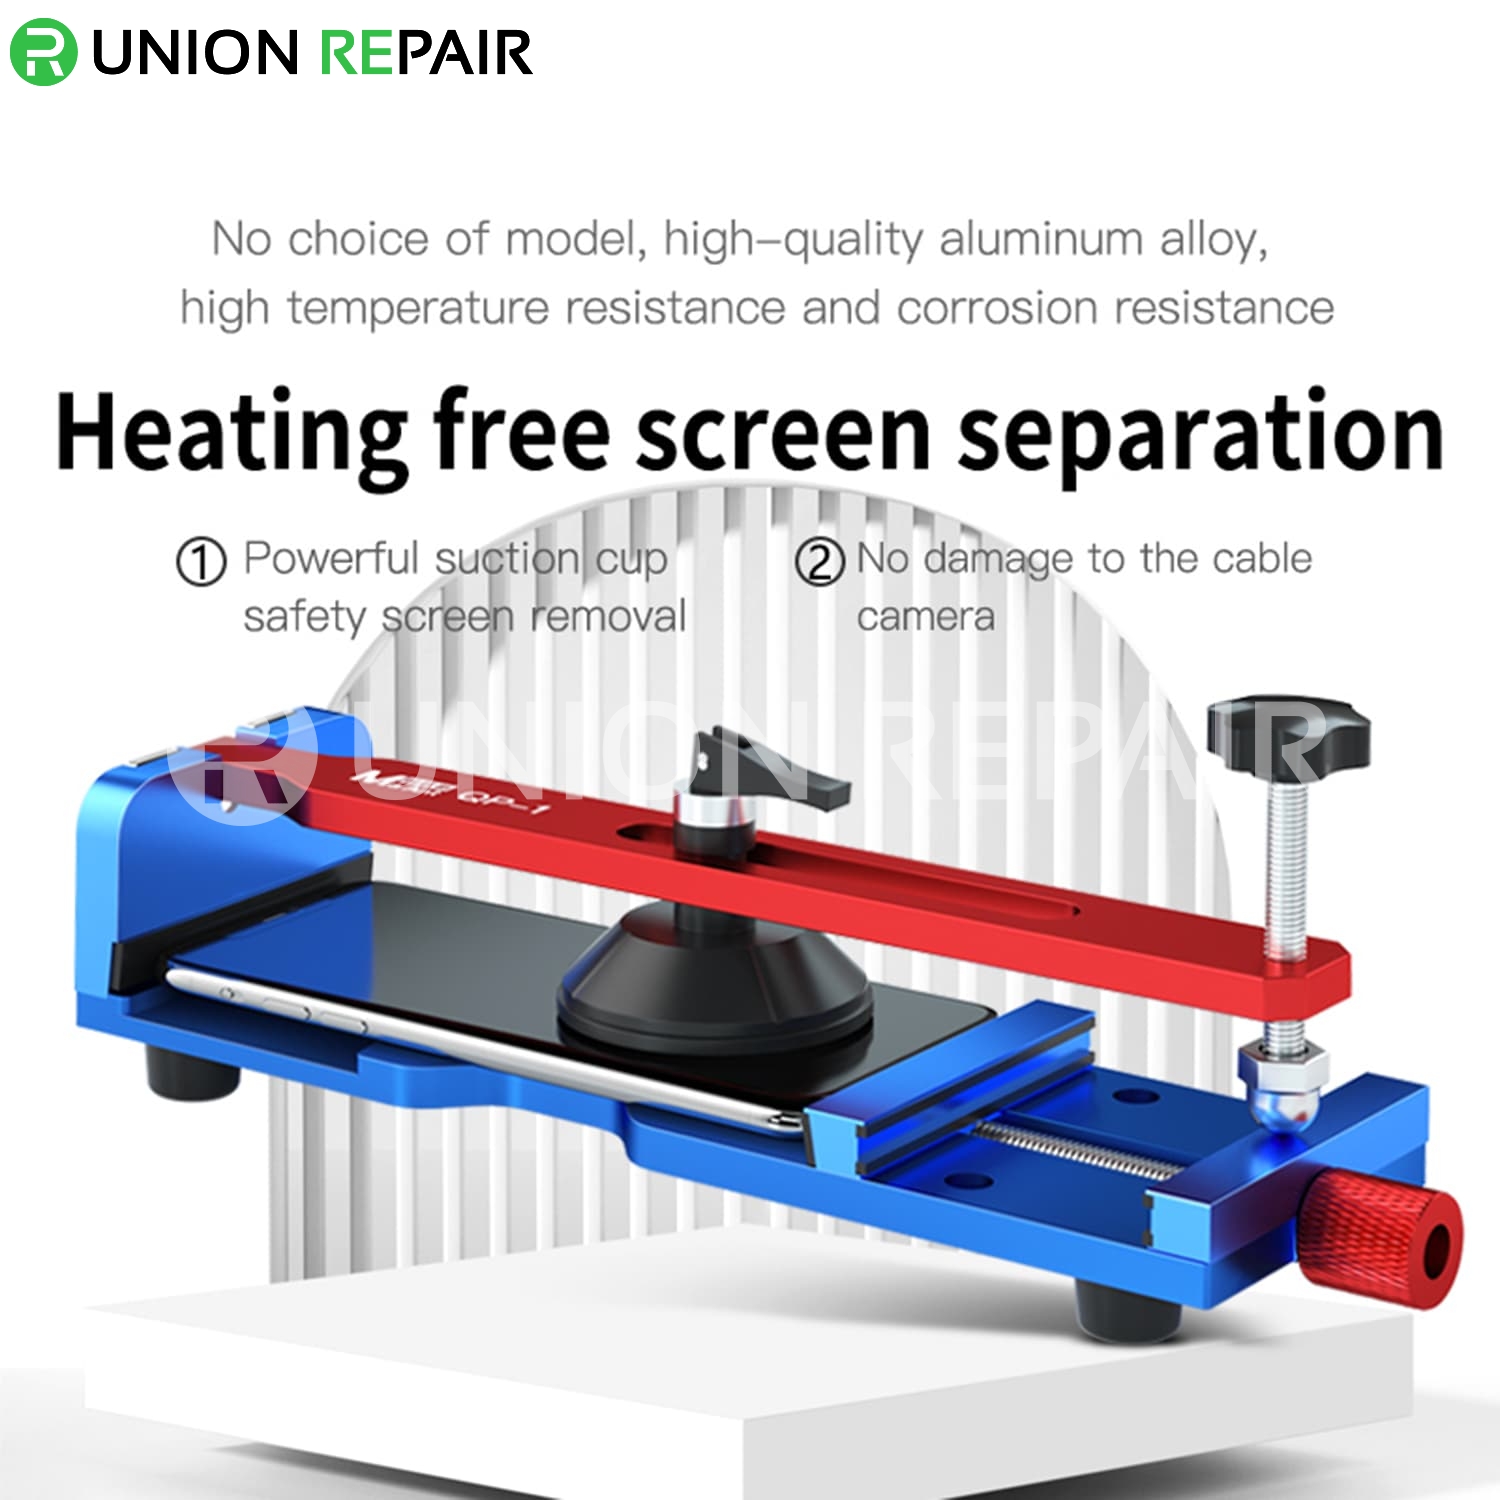 MaAnt QP-1 Heating Free Screen Separation